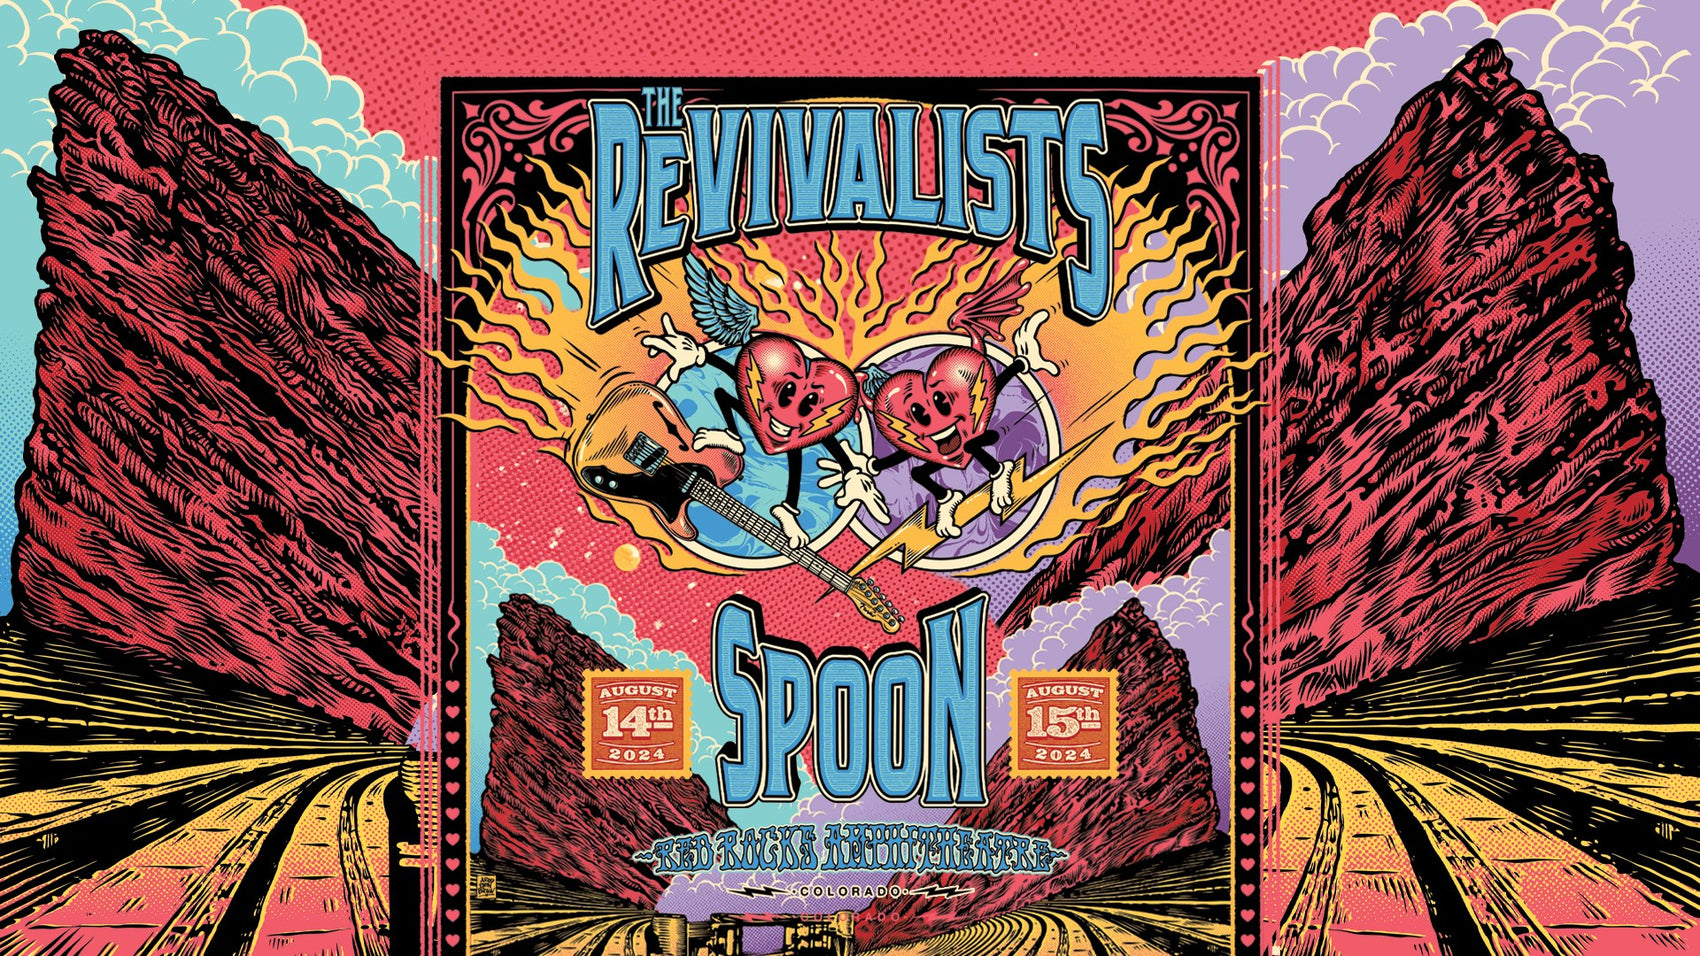 The Revivalists + Spoon